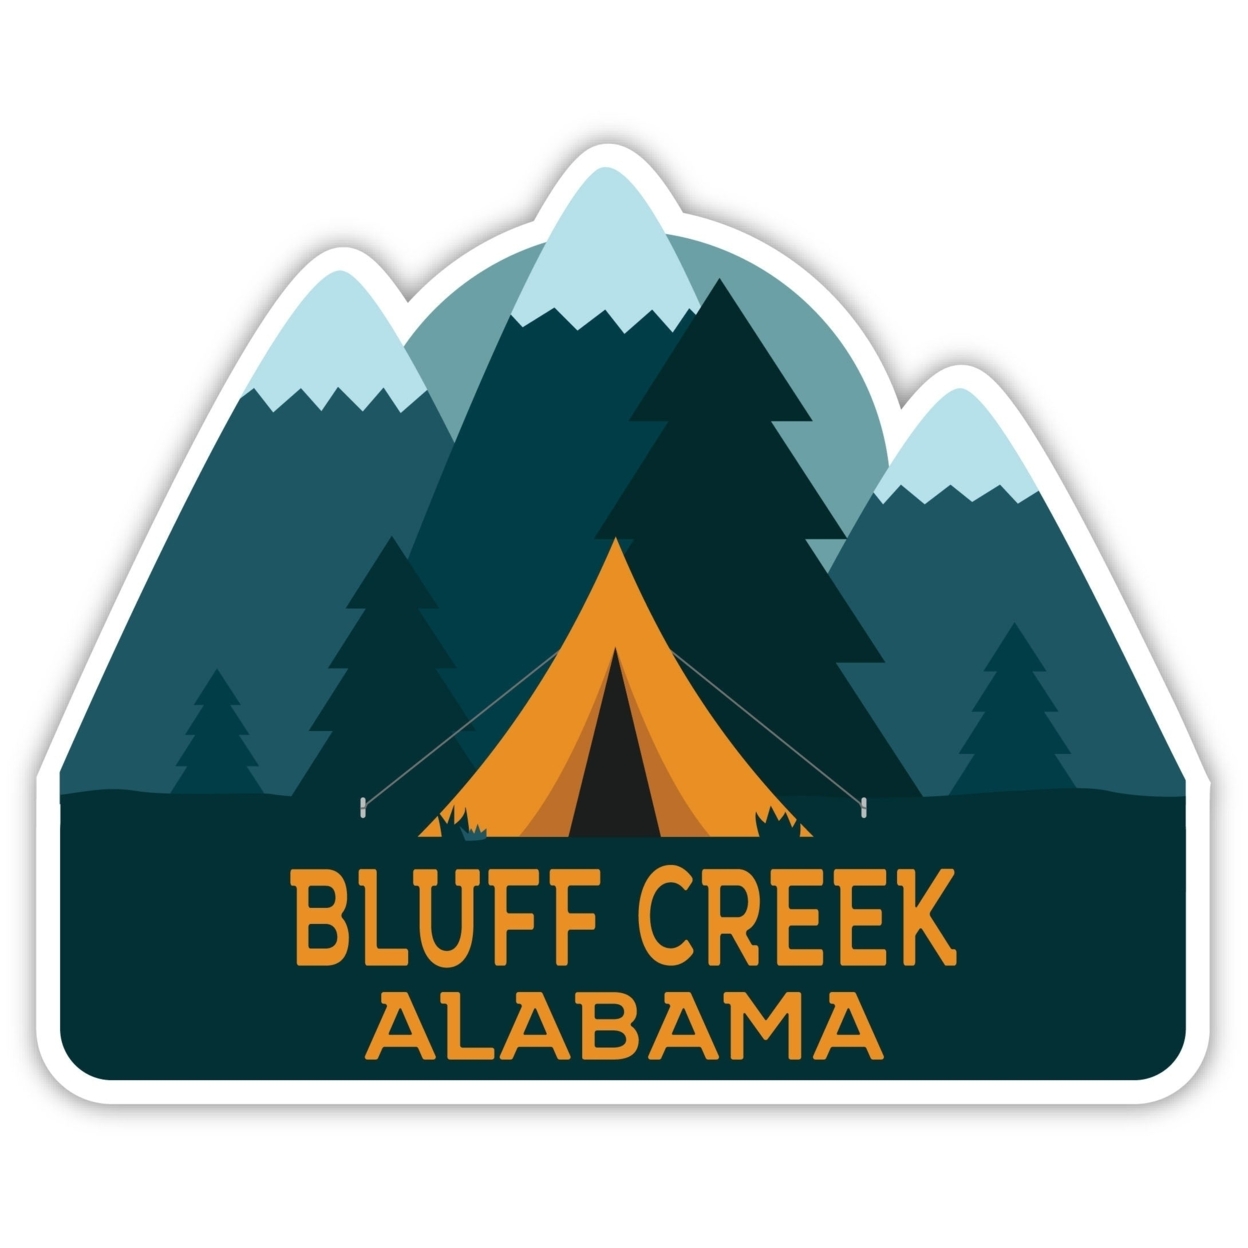 Bluff Creek Alabama Souvenir Decorative Stickers (Choose Theme And Size) - 4-Pack, 10-Inch, Tent